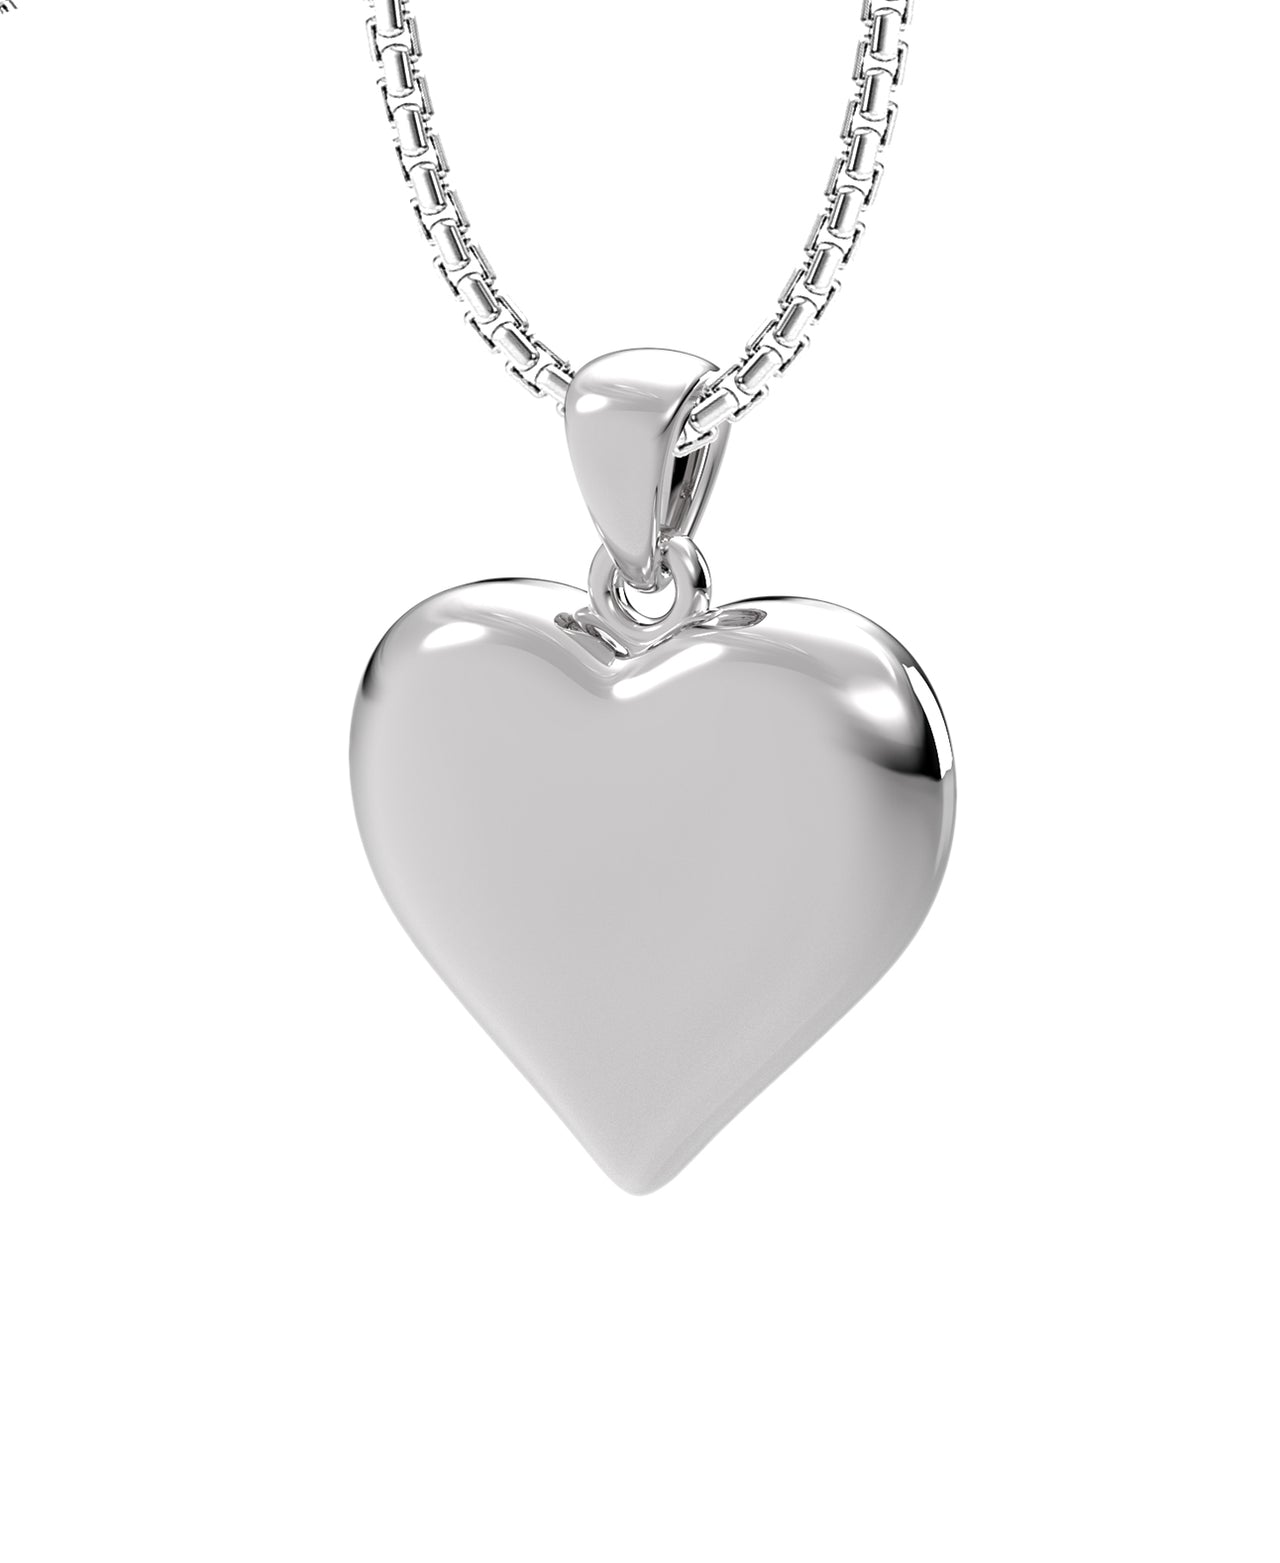 Ladies Sterling Silver Heart Pendant Necklace, 22mm